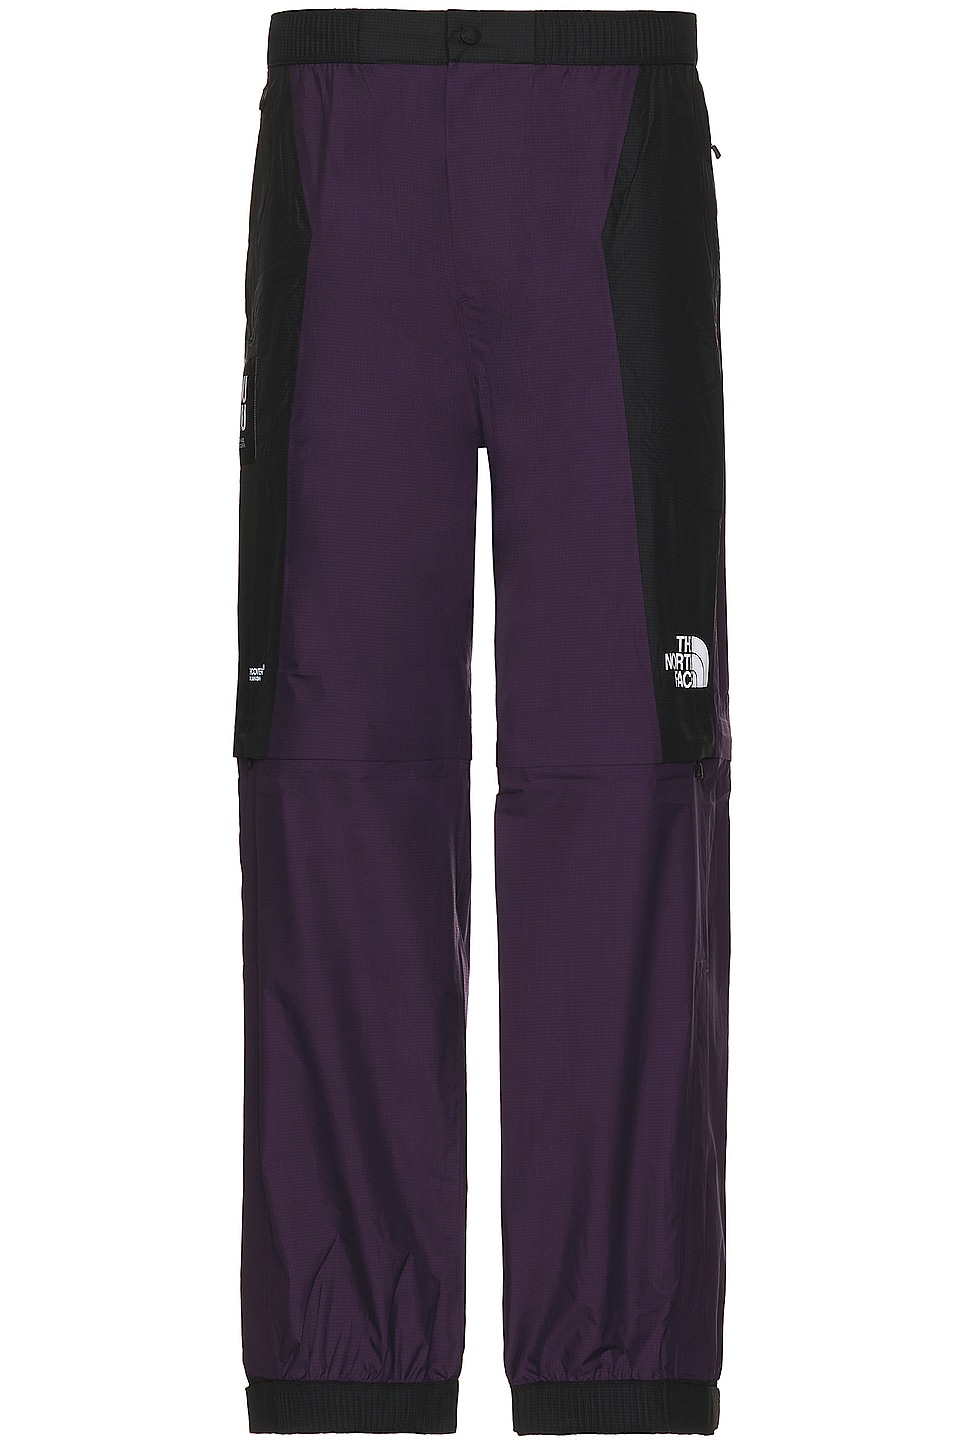 Image 1 of The North Face Soukuu Hike Convertible Shell Pant in Tnf Black & Purple Pennat